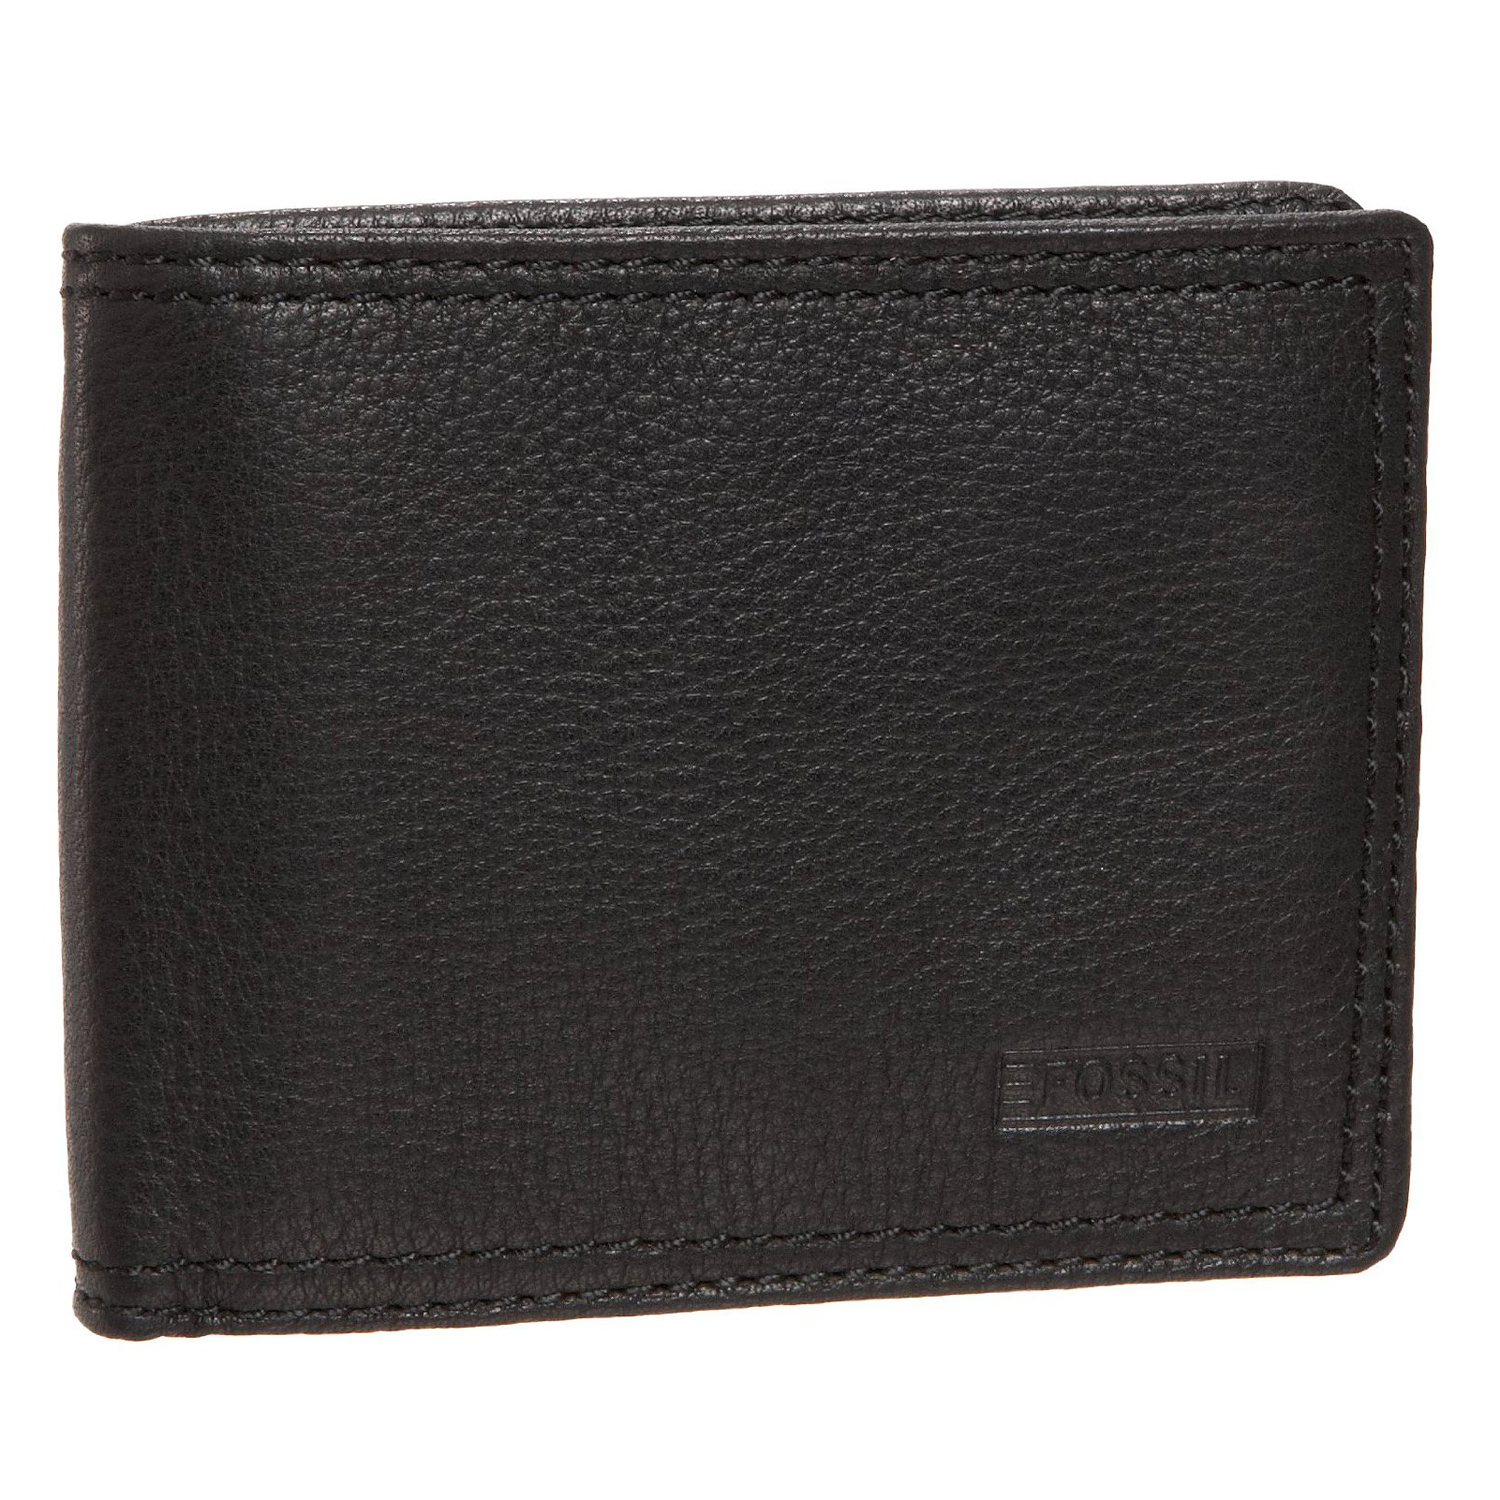 My loss is your gain!: Fossil Men's 'Midway' Traveler Leather Wallet ...